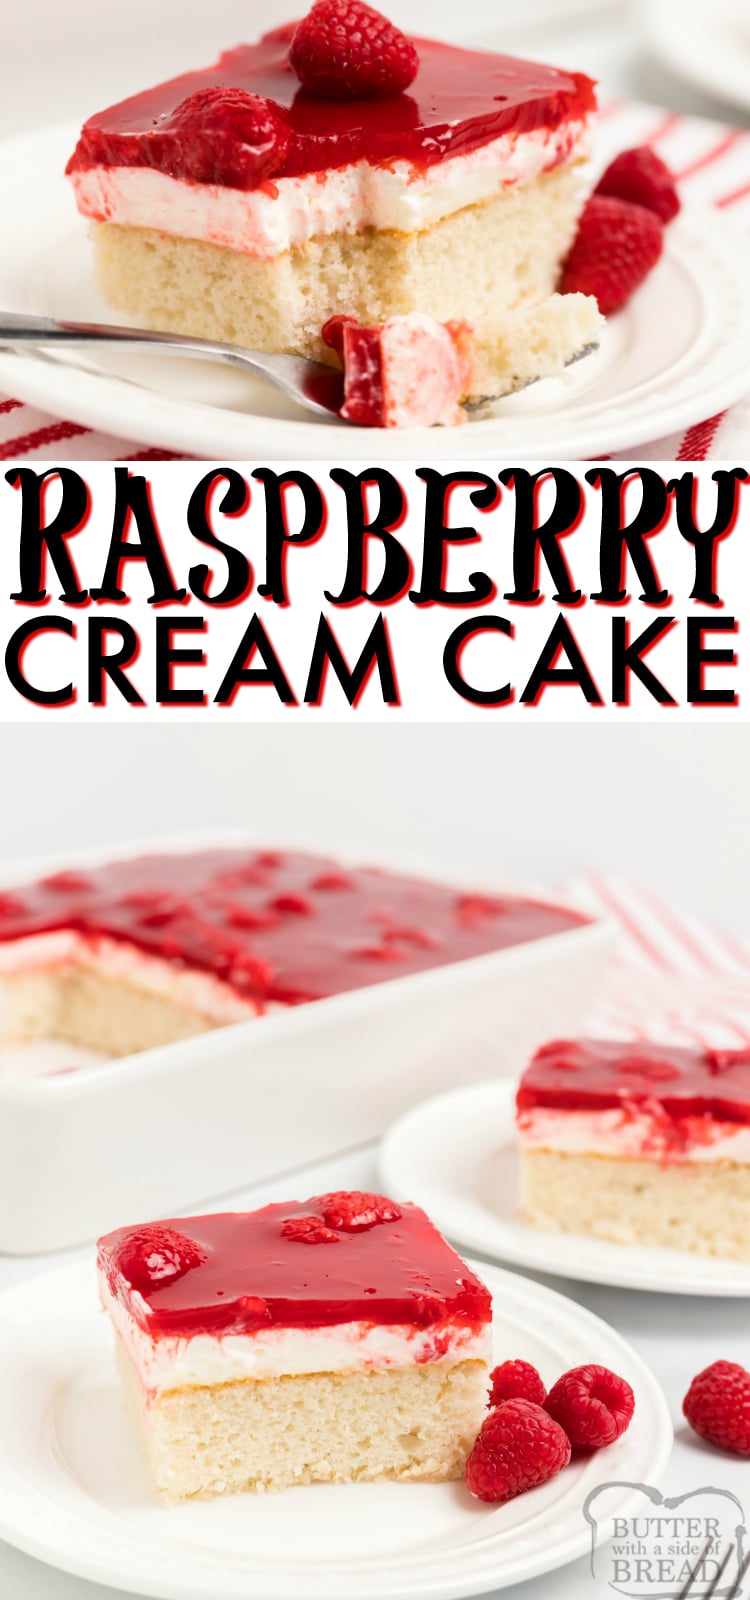 Raspberry Cream Cake begins with a white cake mix that is topped with sweet whipped cream, raspberries and danish dessert. Wonderful raspberry cake recipe with great flavors!